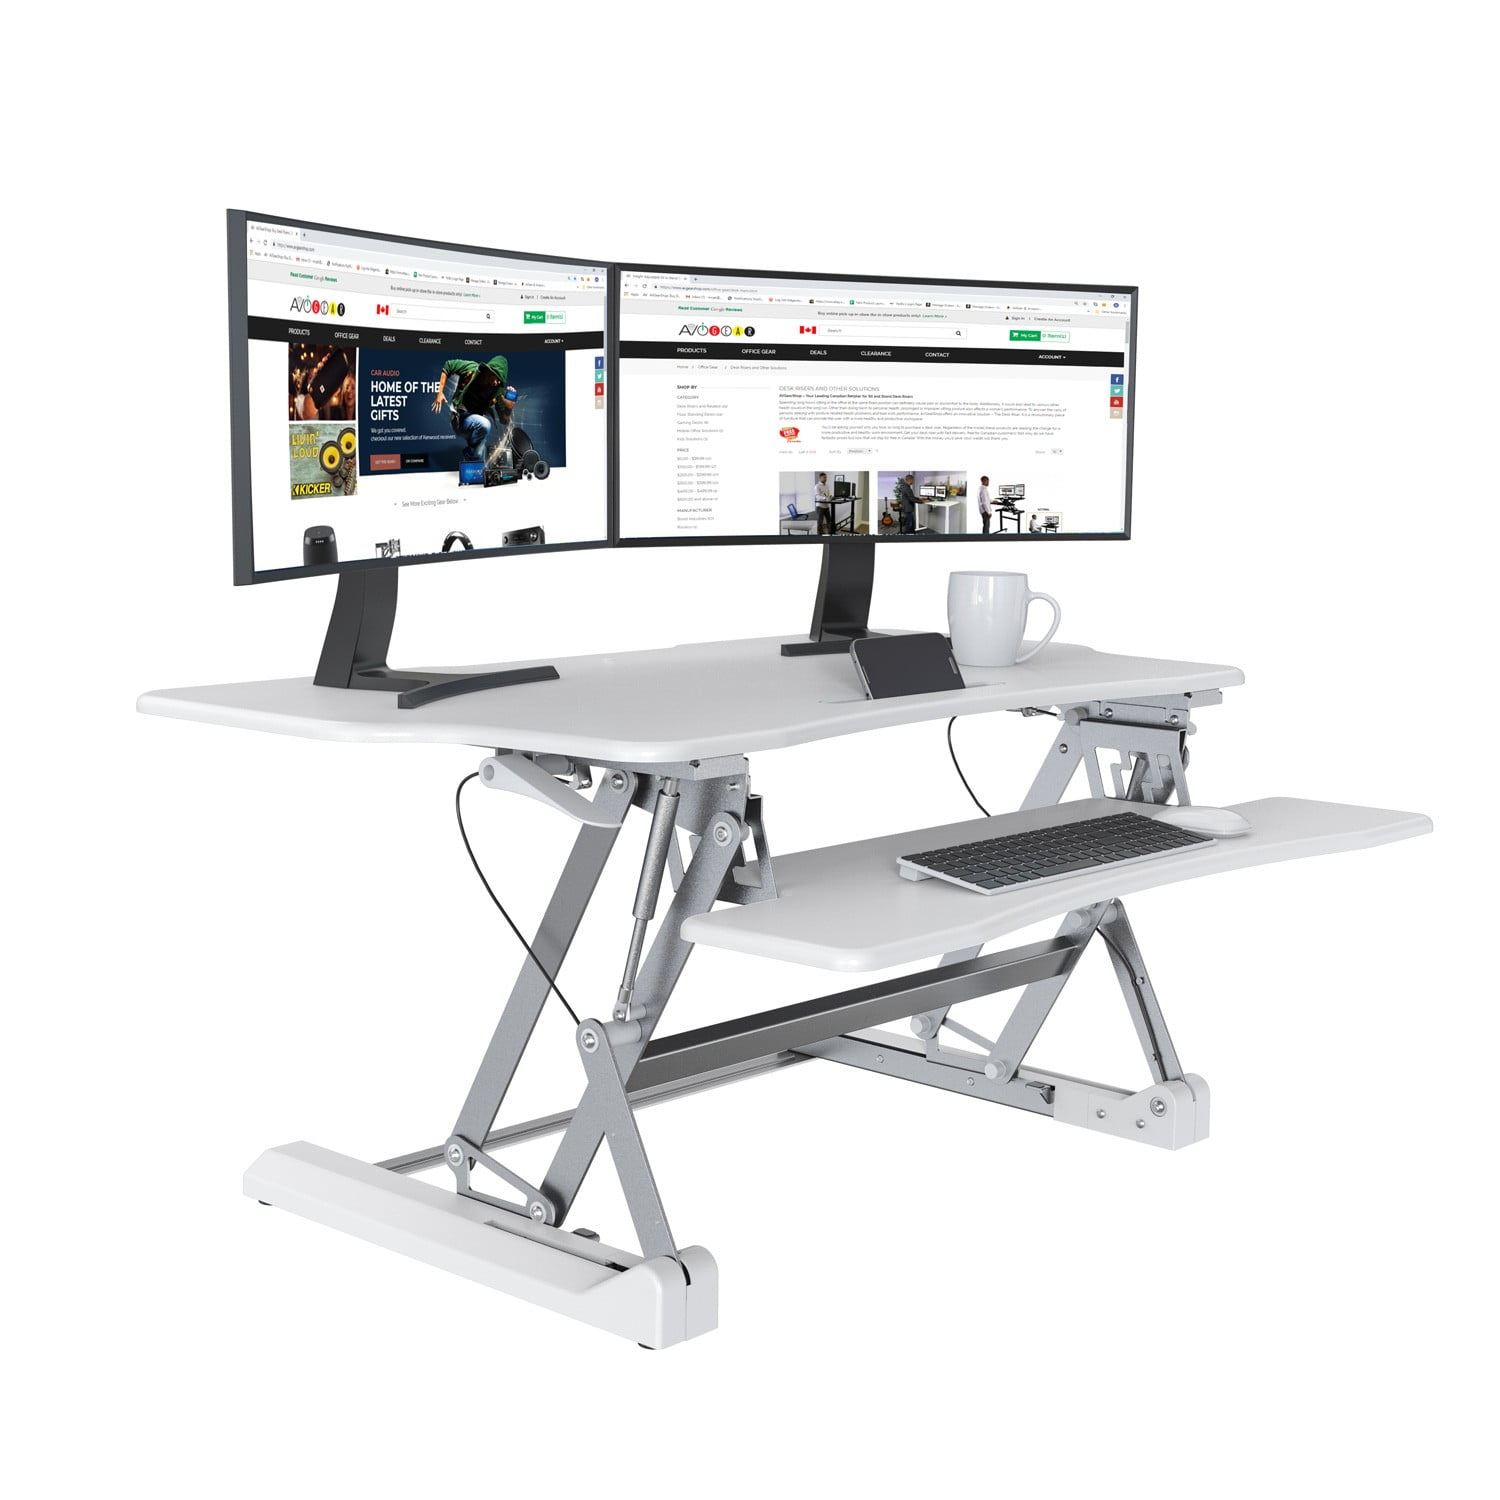 Boost Industries Sts Dr46ii Sit To Stand Standing Desk Riser With